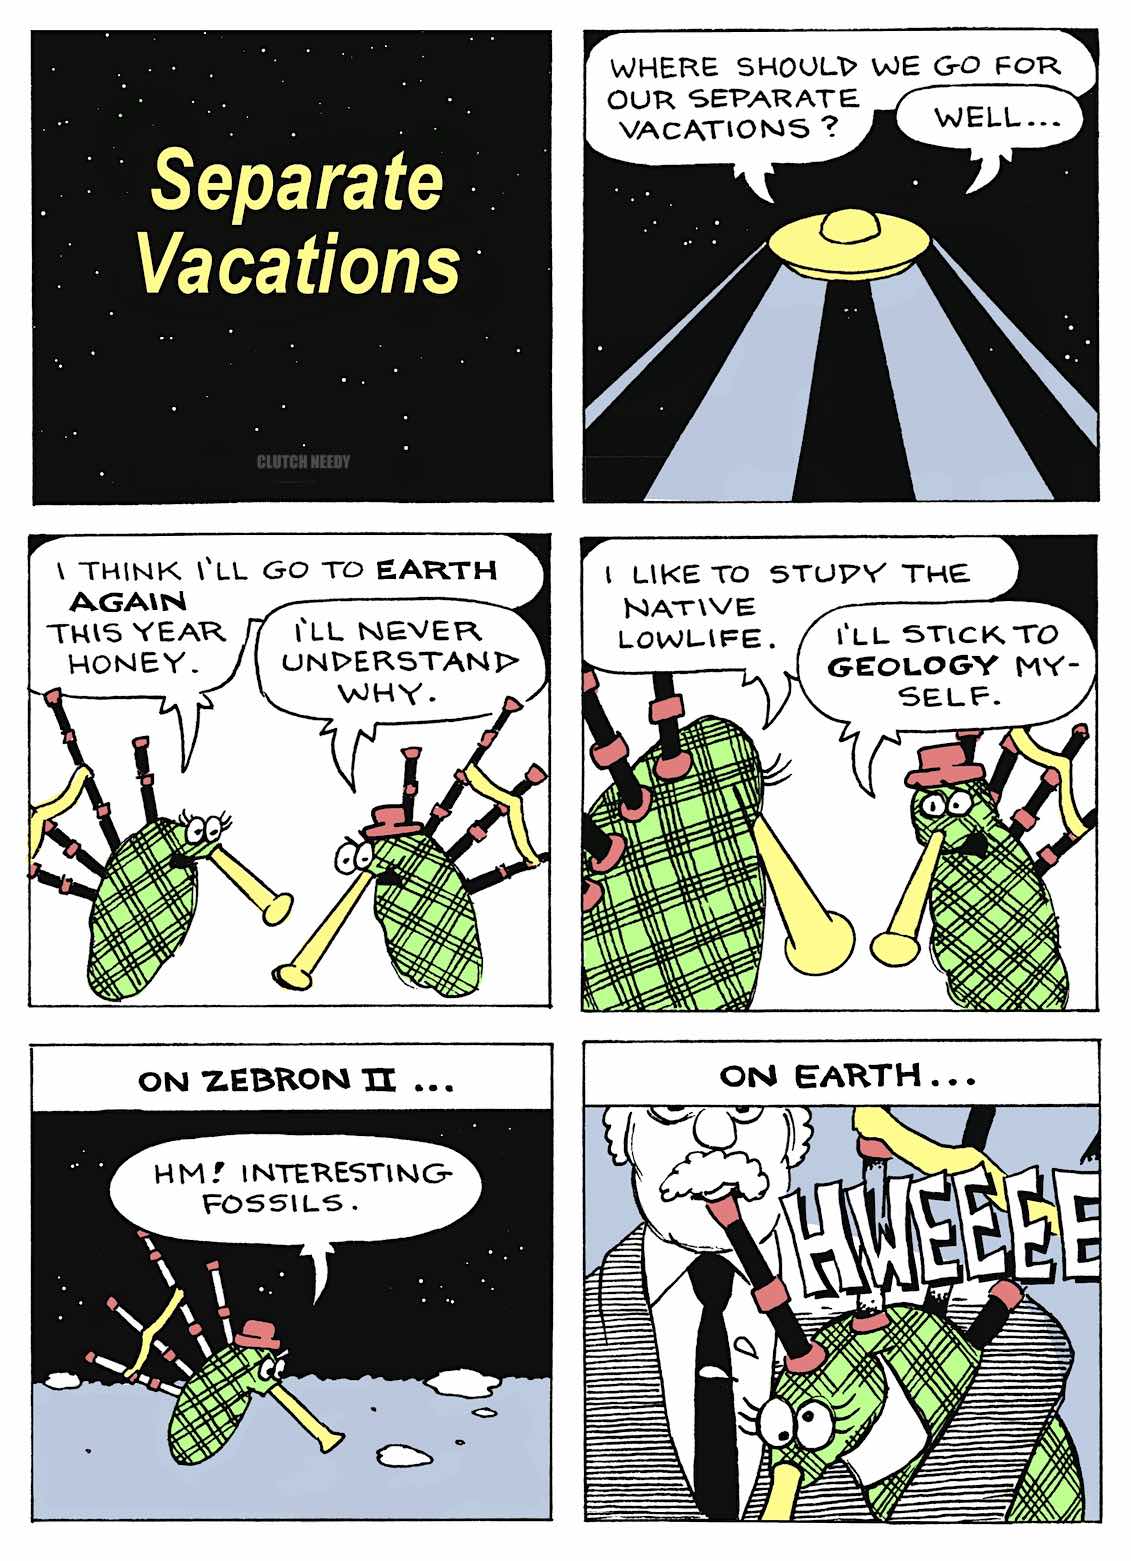 SEPARATE VACATIONS a cartoon by Clutch Needy about space aliens that look like Scottish bagpipes